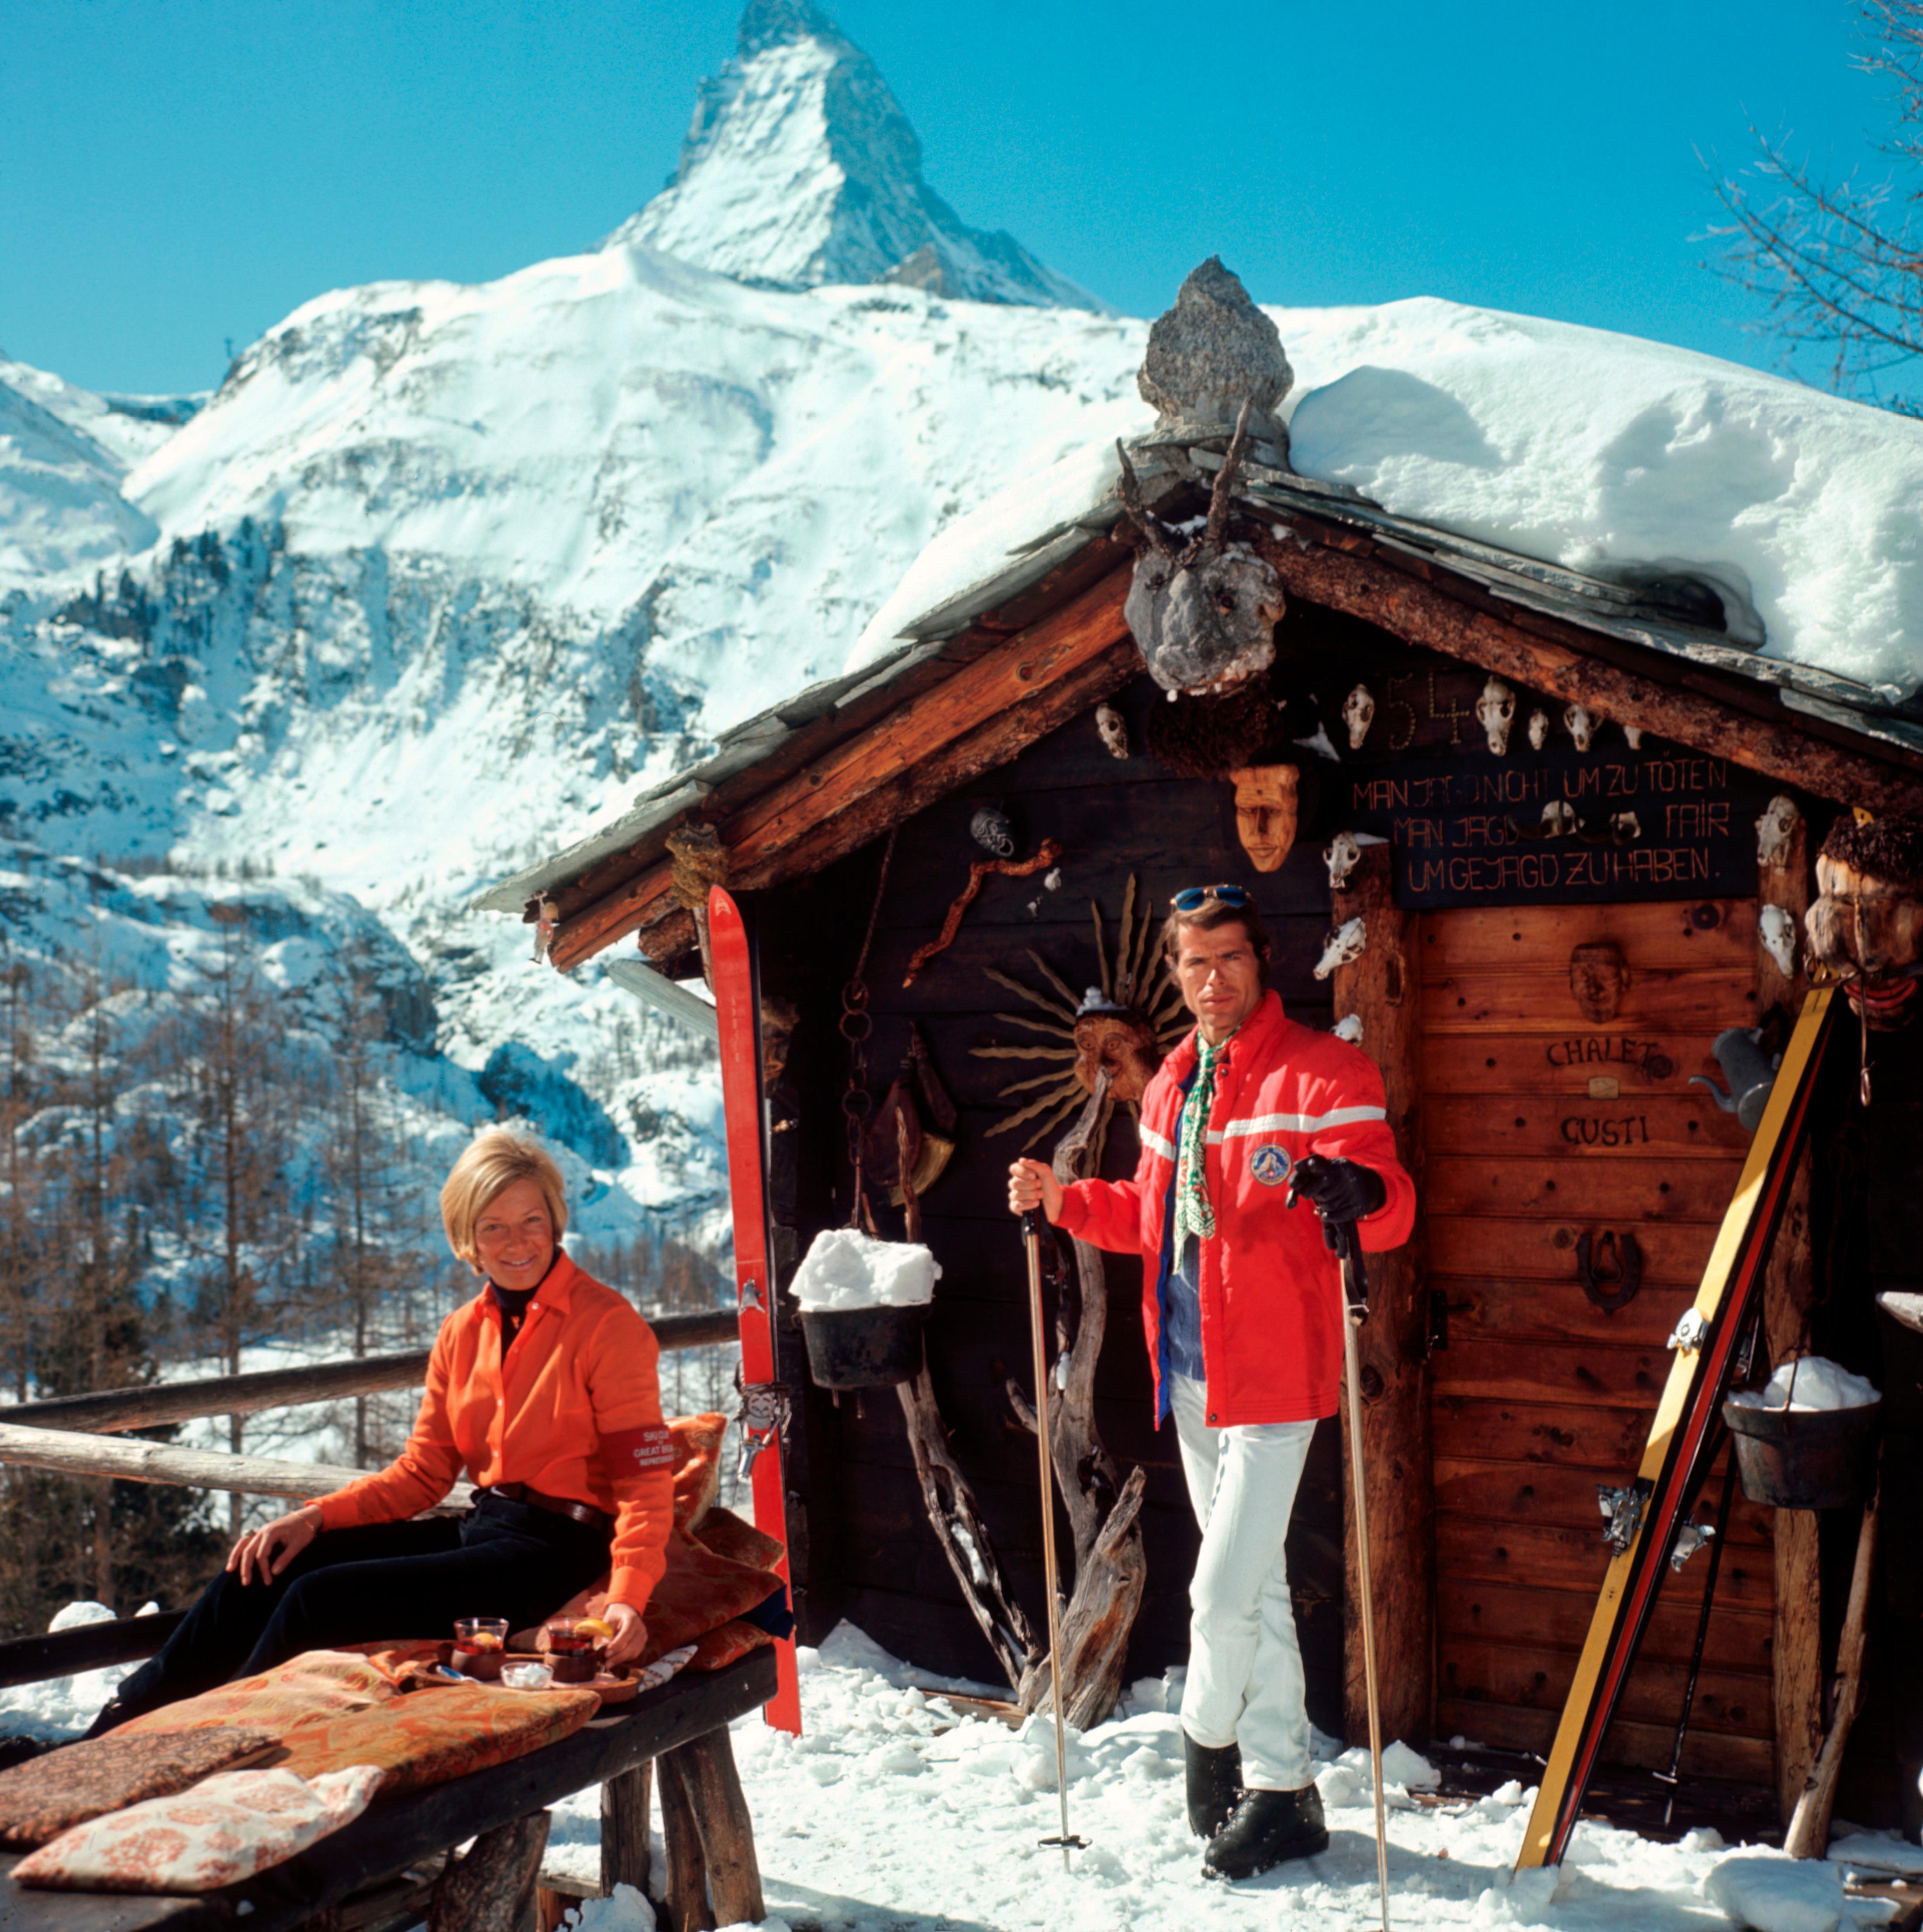 'Chalet Costi' 1968 Slim Aarons Limited Estate Edition

Skiers outside the Chalet Costi in Zermatt, 1968. 

Produced from the original transparency
Certificate of authenticity supplied 
30x30 inches / 76 x 76 cm paper size 

Authorised and issued by